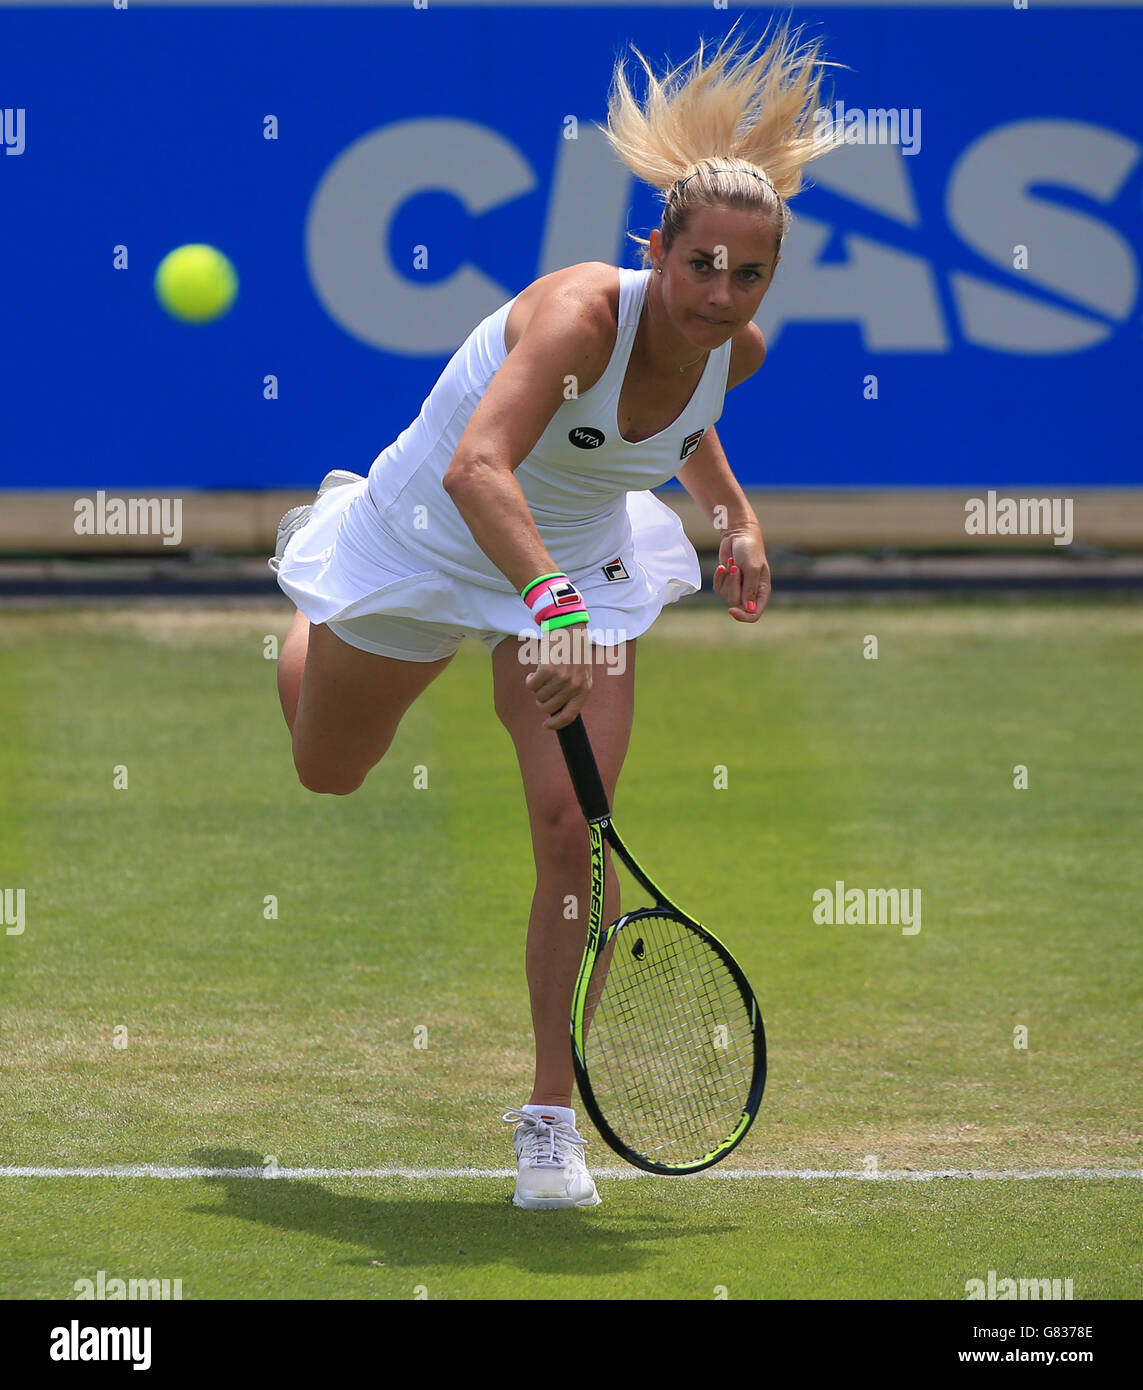 Czech Republic's Klara Koukalova during her straight sets defeat to Romania's Simona Halep during day four of the the AEGON Classic at Edgbaston Priory, Birmingham. PRESS ASSOCIATION Photo. Picture date: Thursday June 18, 2015. See PA story TENNIS Birmingham. Photo credit should read: Nick Potts/PA Wire Stock Photo